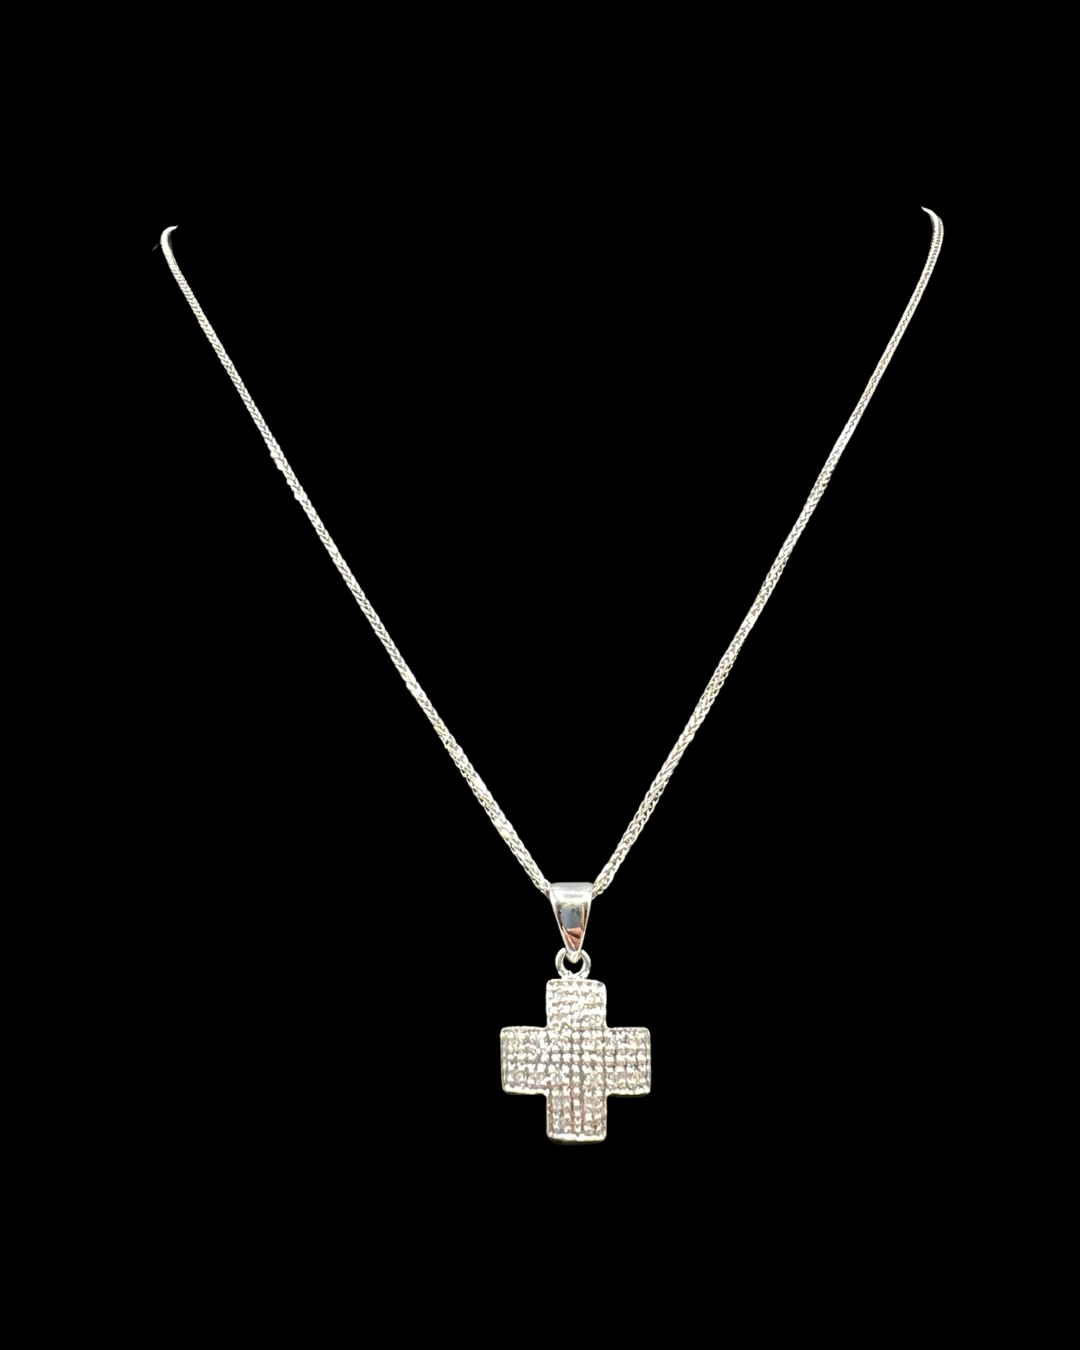 9ct White Gold & 3/4ct Diamond Set Cross & Chain 46cm in length - Very Good Condition - 4.2 grams